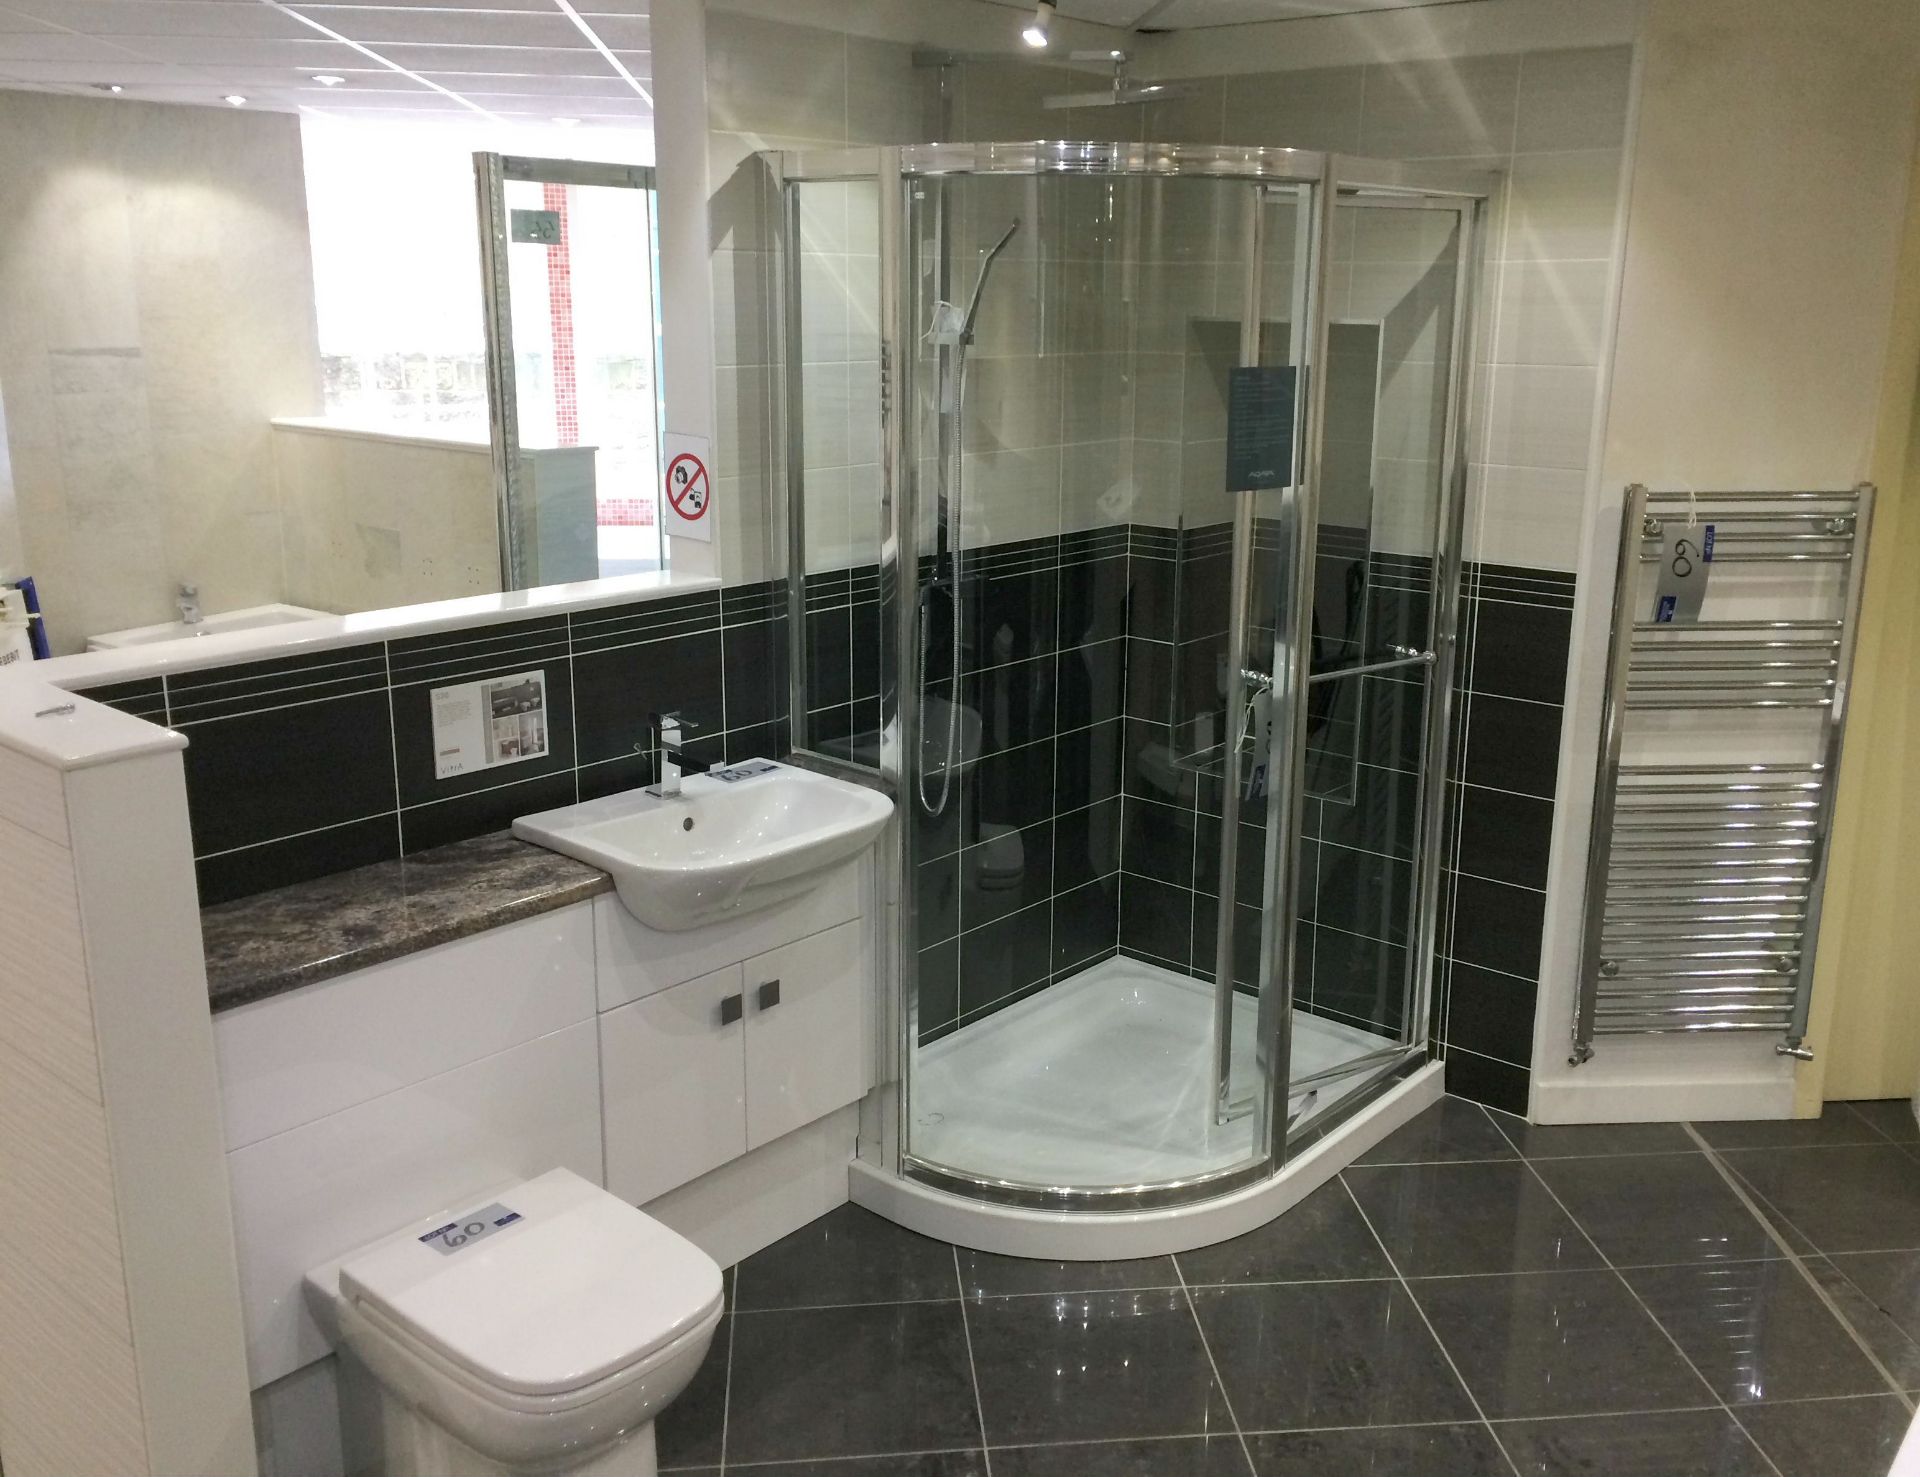 A Bathroom Display comprising Aqata Quad Bespoke Clear Glass and Chrome Hinged Door Curved Shower